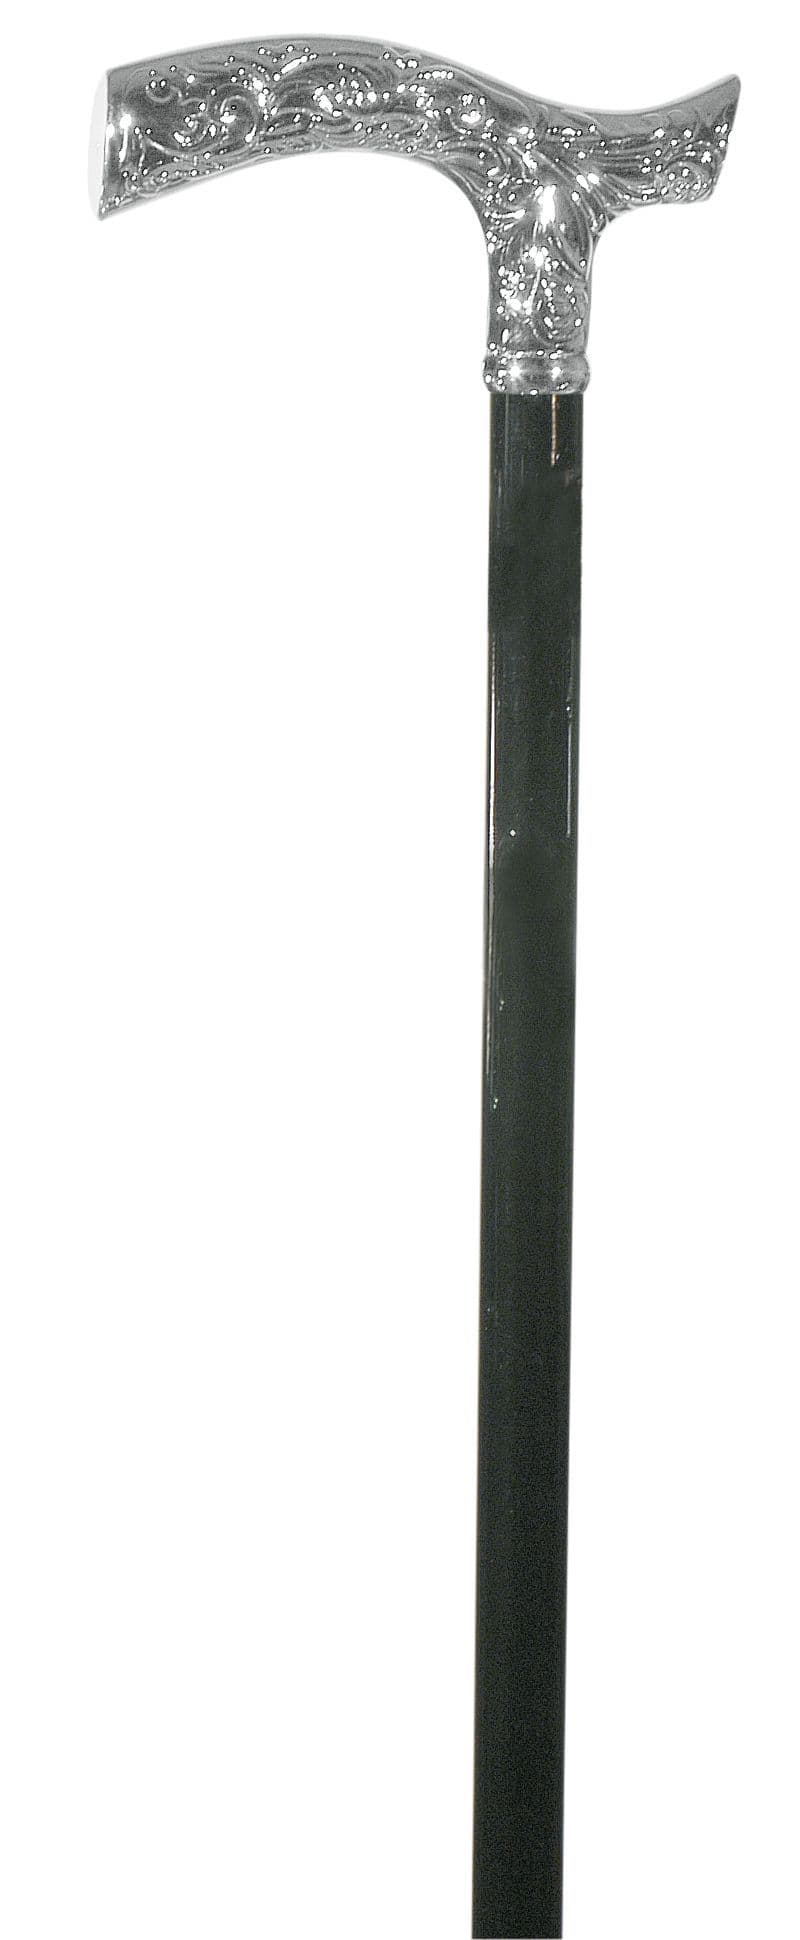 Classic Canes Chrome plated crutch cane, patterned, black shaft